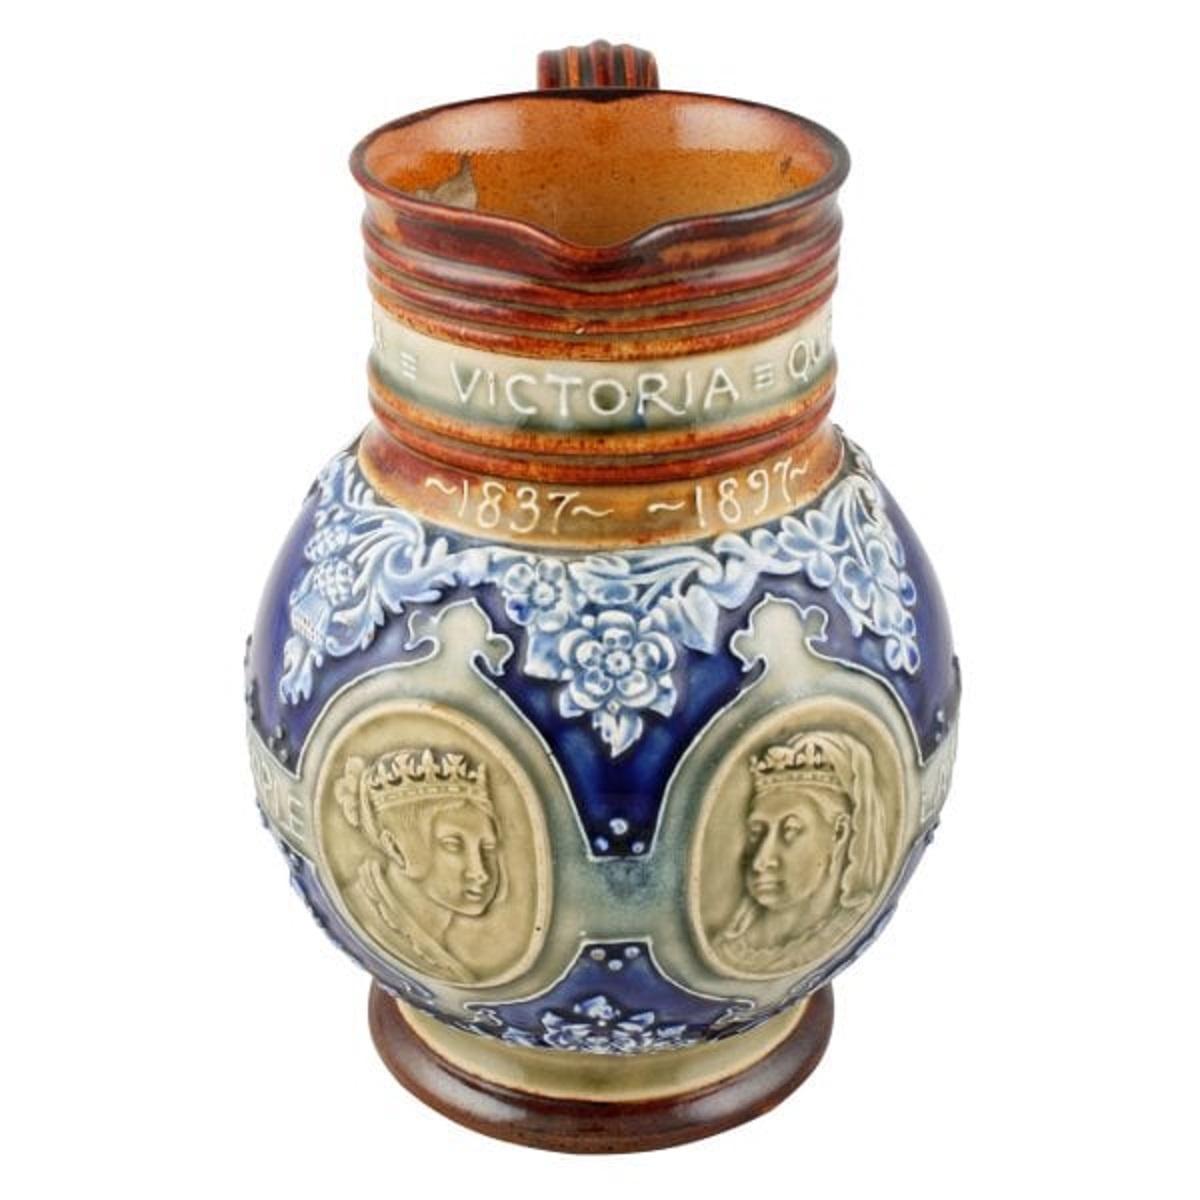 A stunning late 19th century Victorian Doulton Lambeth pottery jug commemorating Queen Victoria's 60th year on the throne.

The jug is decorated with a cameo of the young and old Victoria and has written around the jug 